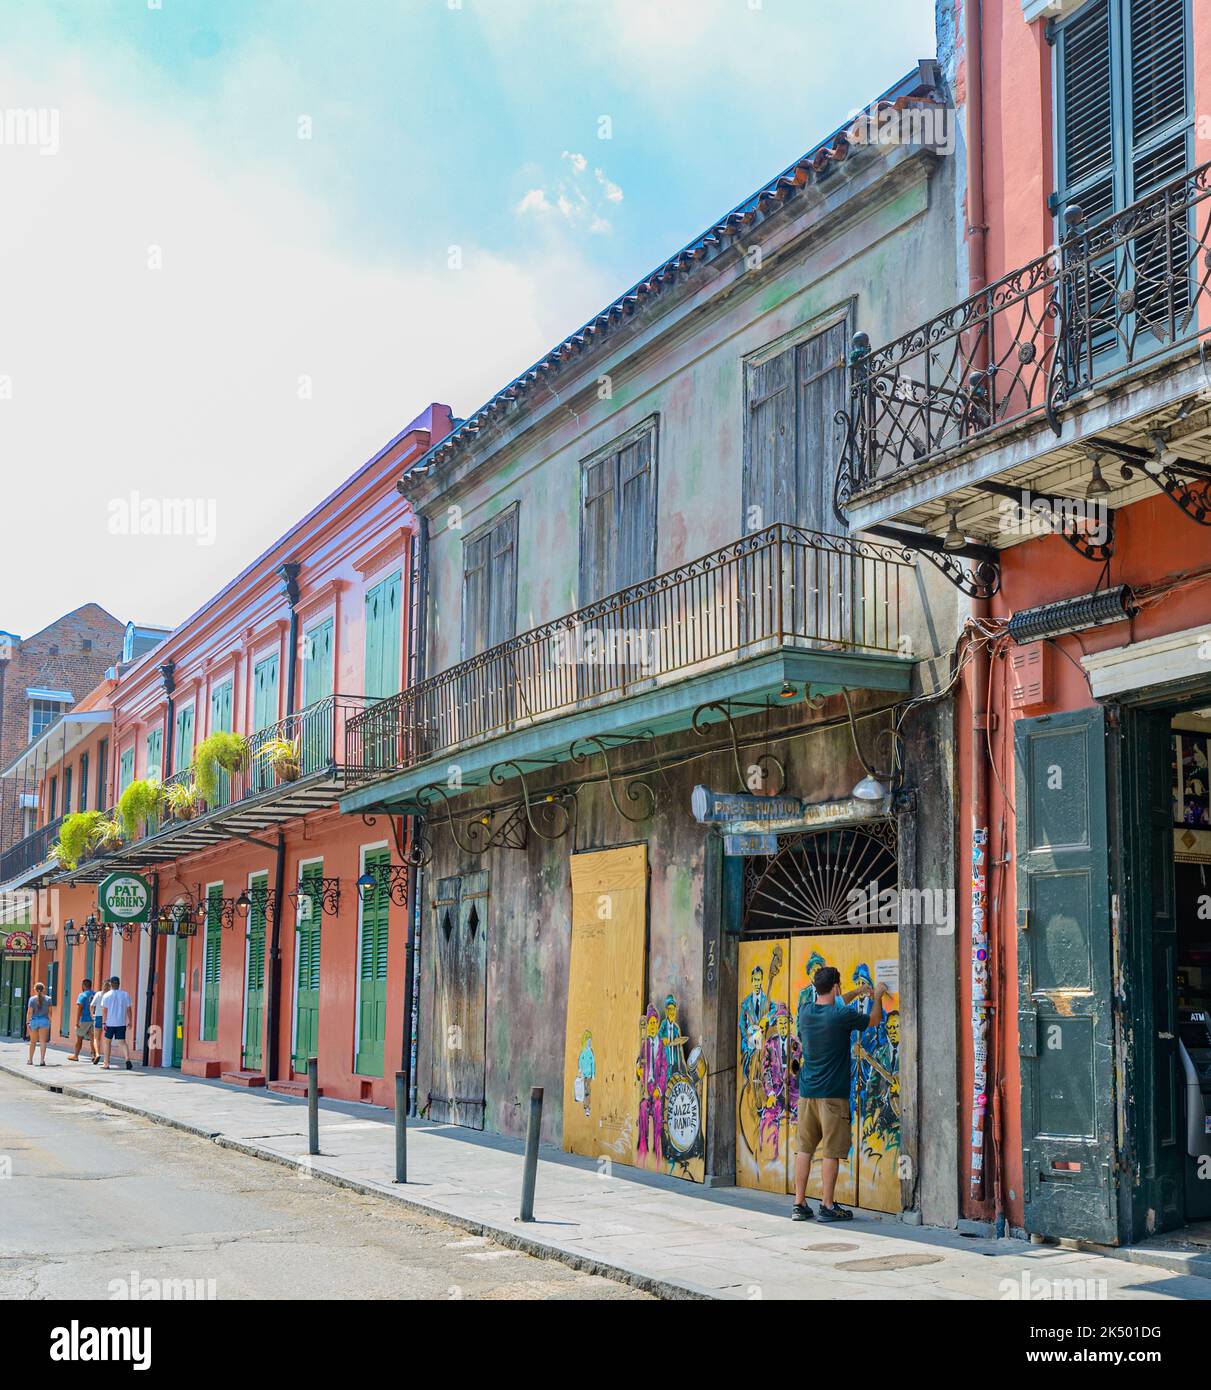 NEW ORLEANS, LA, USA - JUNE 20, 2020: Cityscape of French Quarter featuring Preservation Hall and Pat O'Brien's on St. Peter Street Stock Photo